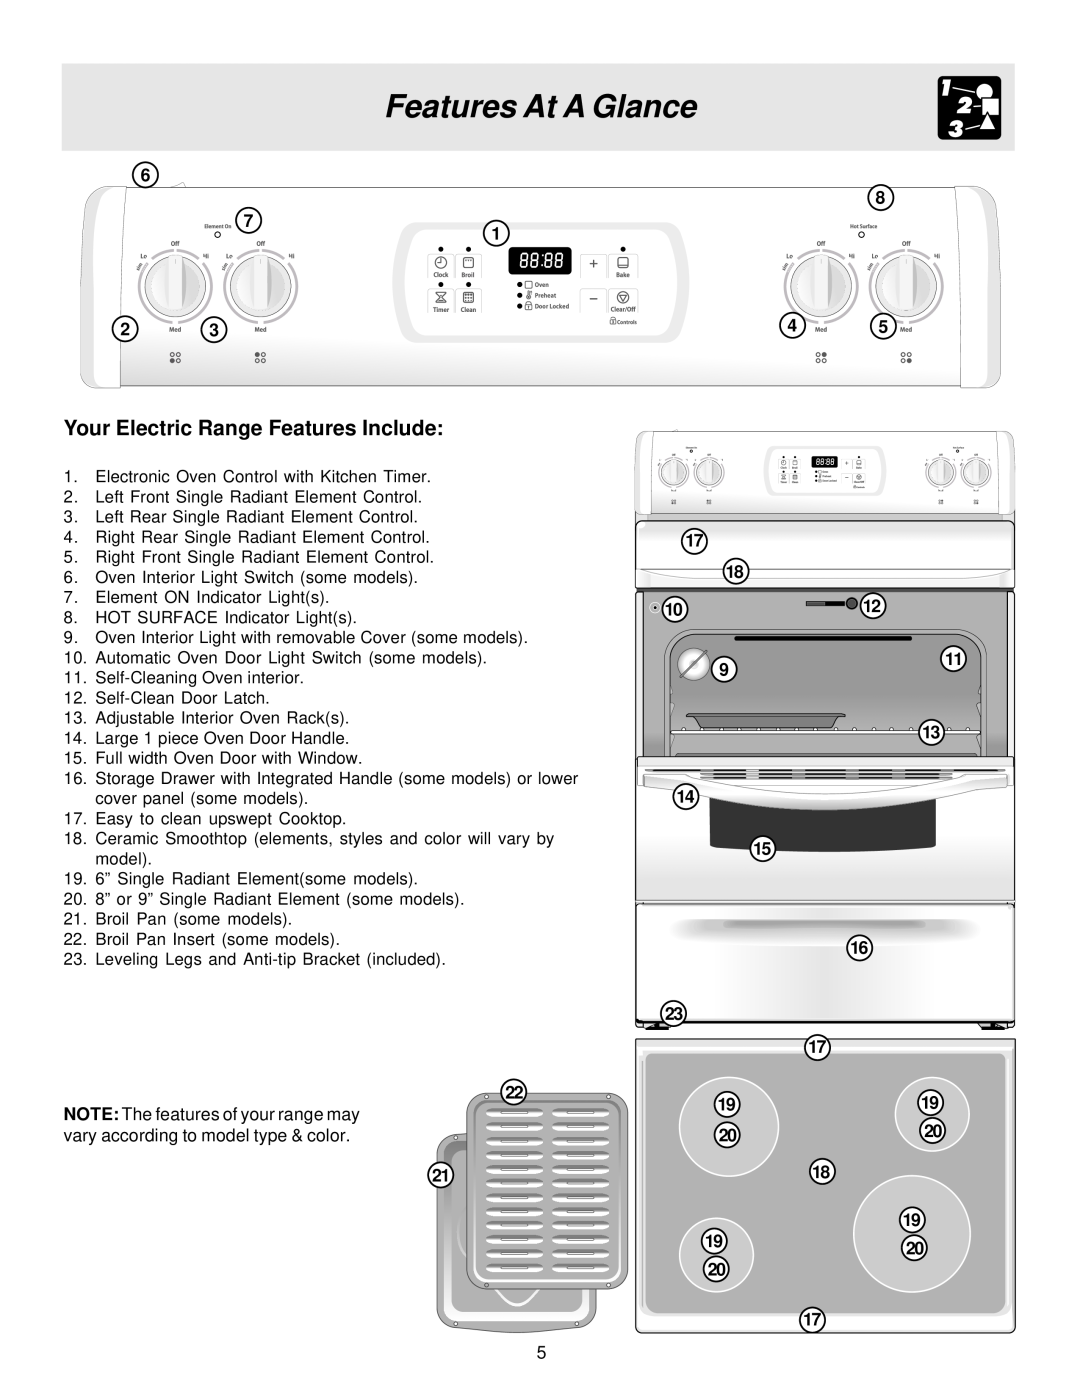 White-Westinghouse ES200 important safety instructions Features At A Glance, Your Electric Range Features Include 